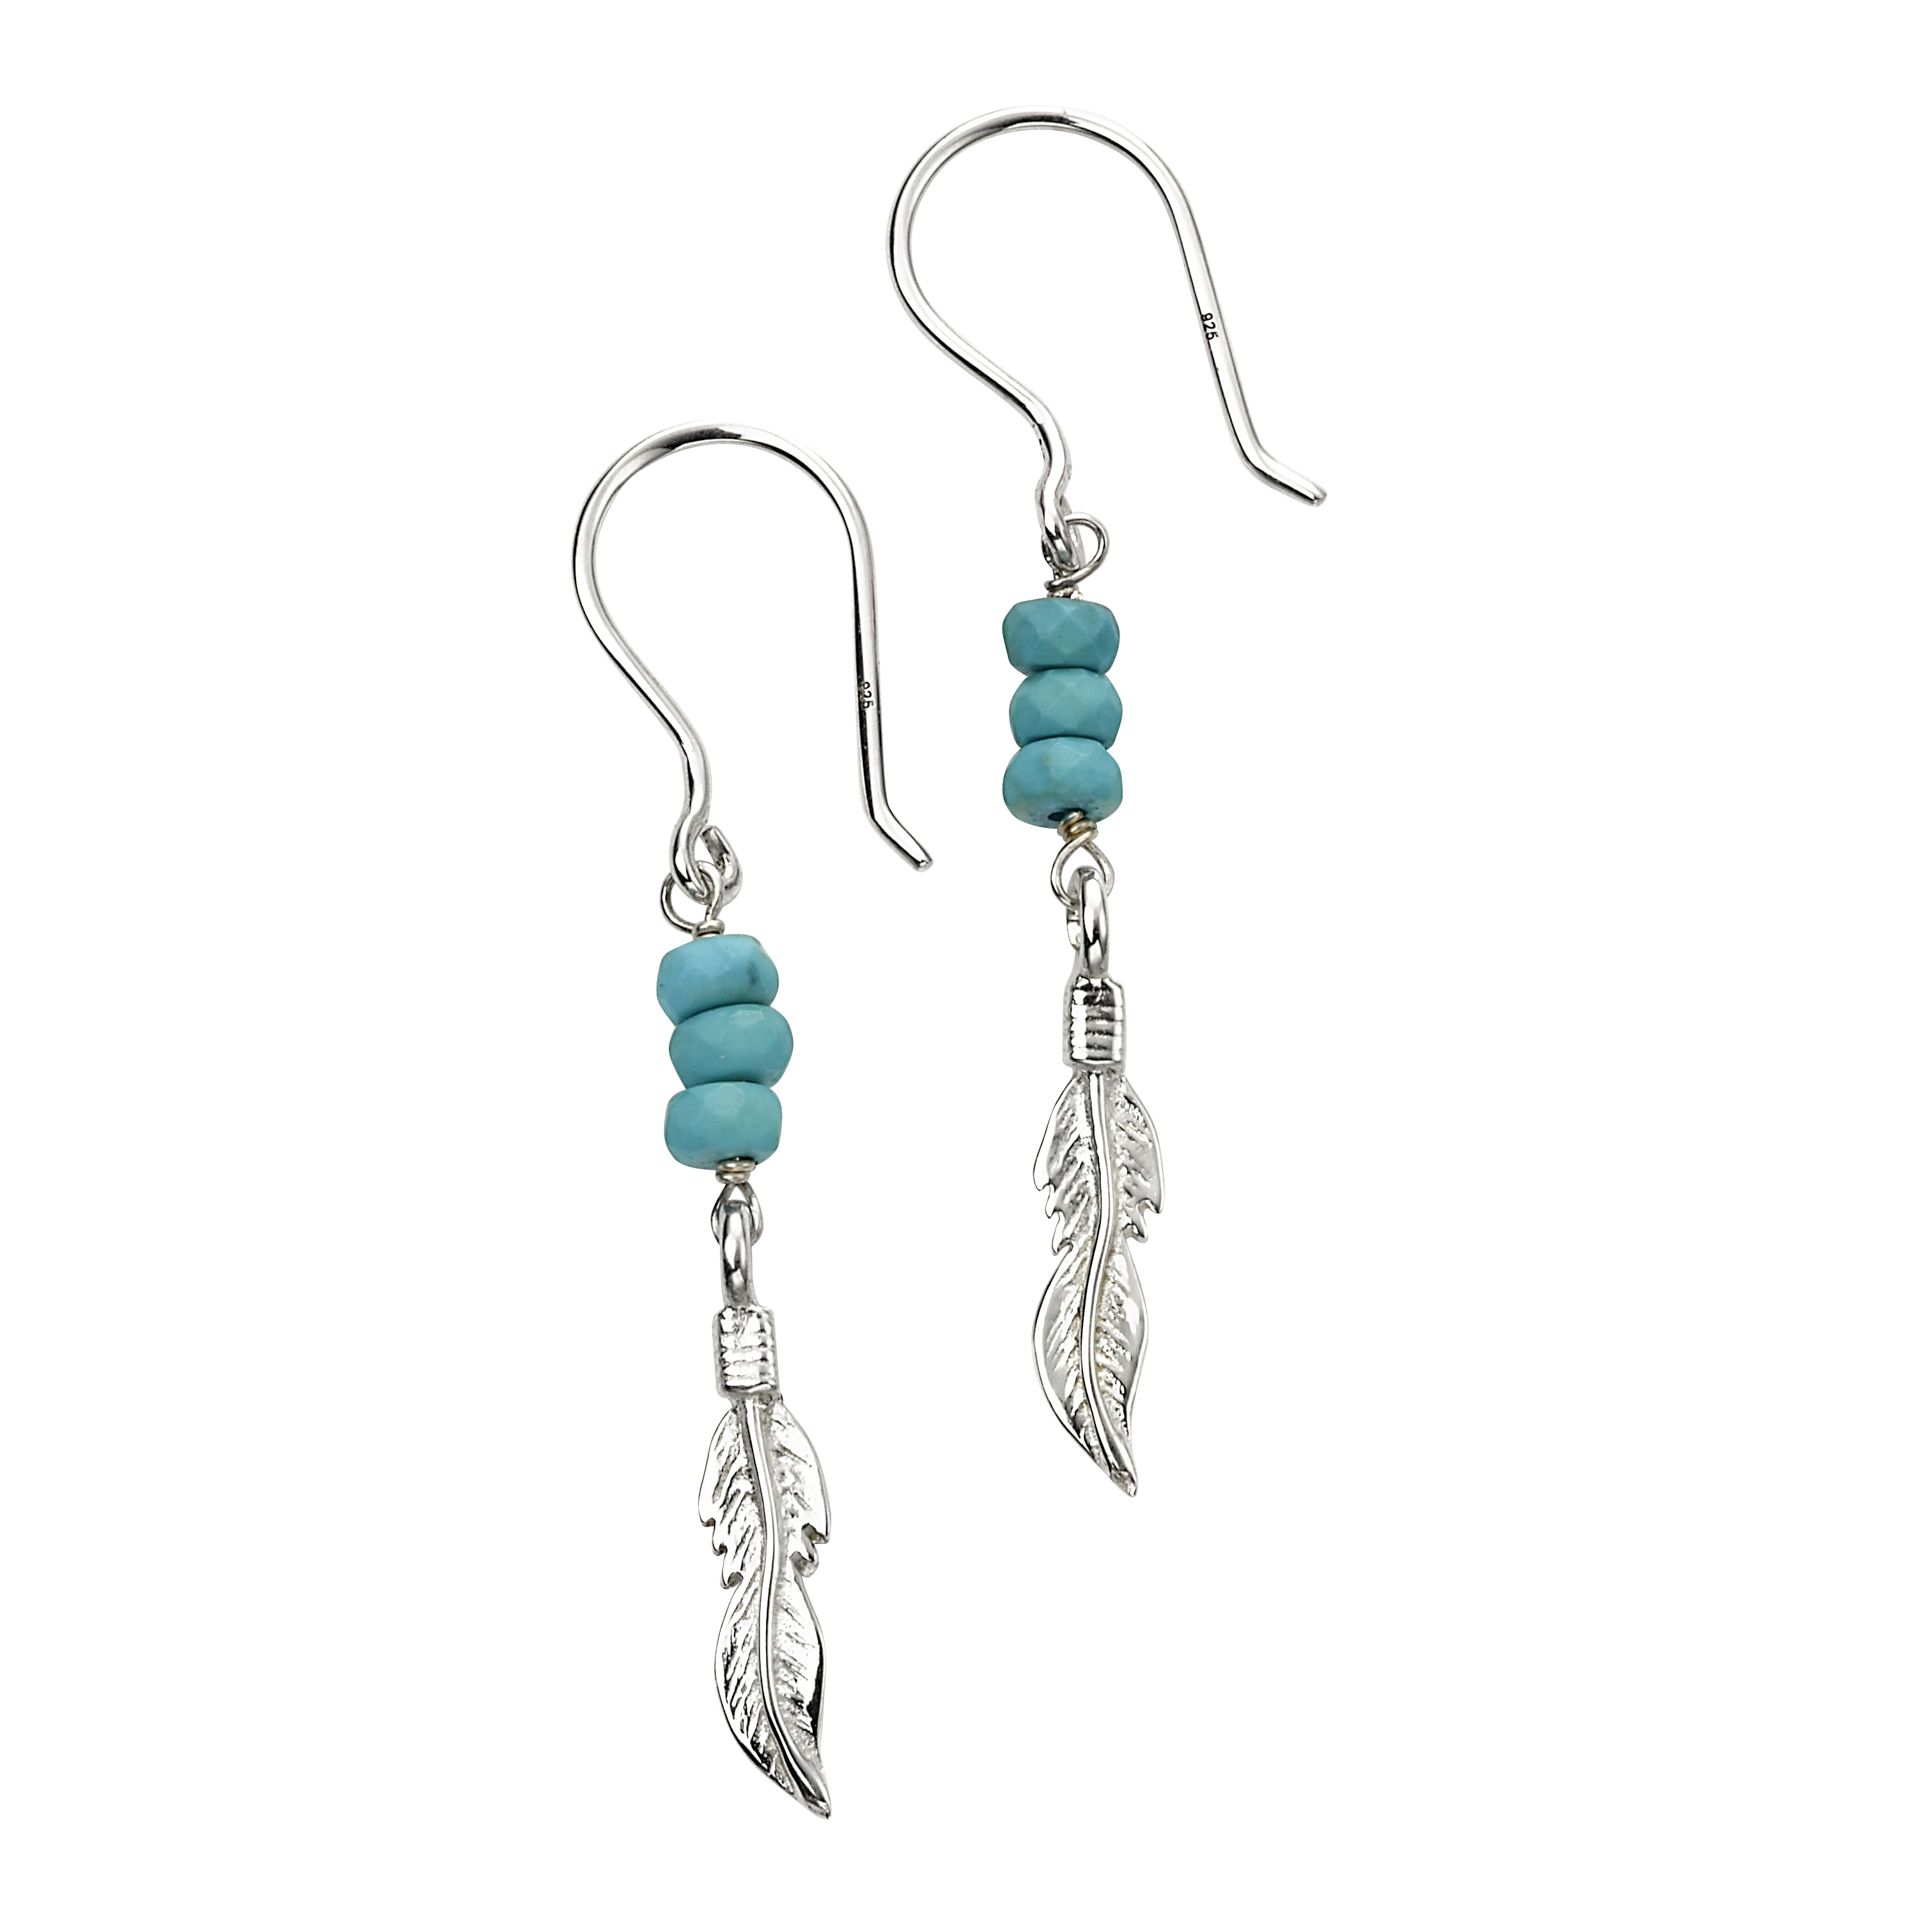 Beginnings 925 Sterling Silver Ladies' Blue Magnesite Stone Silver Feather Charm Drop Hook Earrings<li>Design: Inspired by nature, these gorgeous feather dangle earrings are a wonderful update to your silver jewellery collection. Featuring on-trend turquoise blue stones to add a pop of colour to your outfit, these drop earrings are perfect for every day wear.<li>Composition: Crafted from genuine 925 sterling silver with a highly polished finish. Visible 925 hallmark stamp can be found on the side of the earring hook.<li>Dimensions: height including hook 51mm, width 4mm, depth 4mm, weight 2g, anti tarnish plated, stone weight 0.35g<li>Fitting: These earrings feature a hook style fitting suitable for pierced ears only<li>Storage: This item includes a lovely white branded Beginnings window gift box to present the jewellery in. This is ideal for gifting and a great place to store the item for future wear.